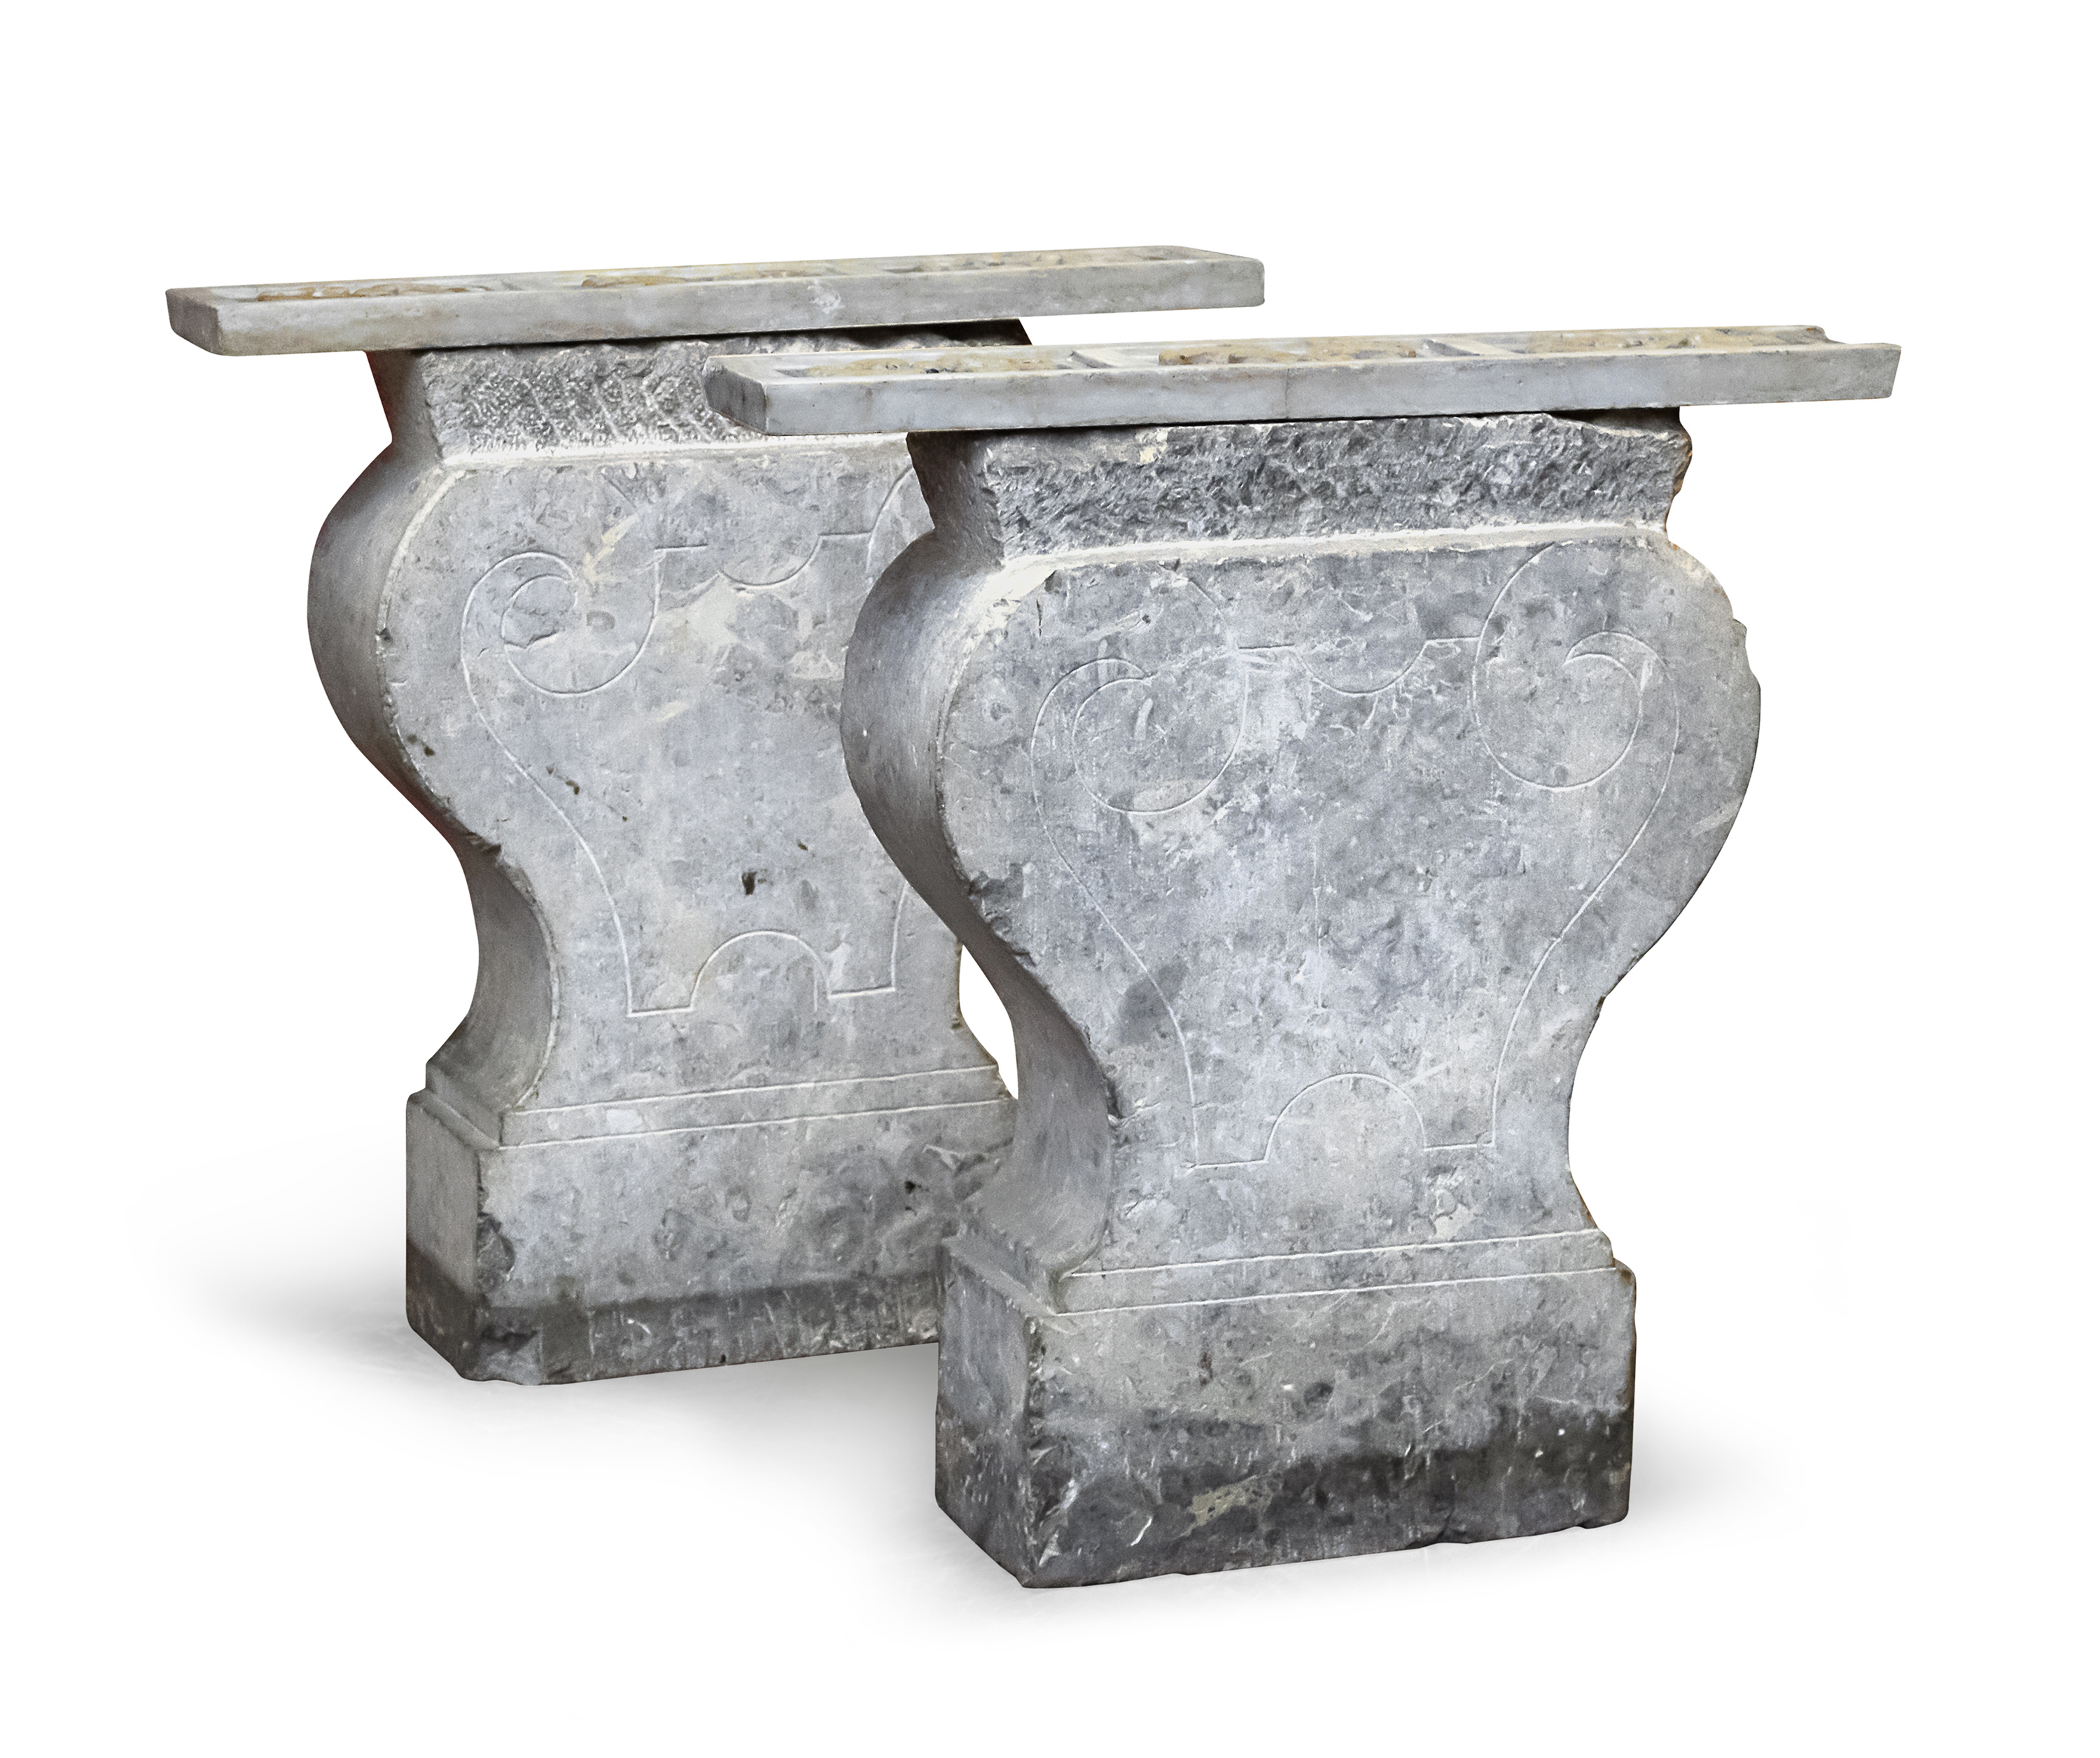 PAIR OF TRAPEZOPHORES IN GRAY PEPERINO MARBLE 16th CENTURY